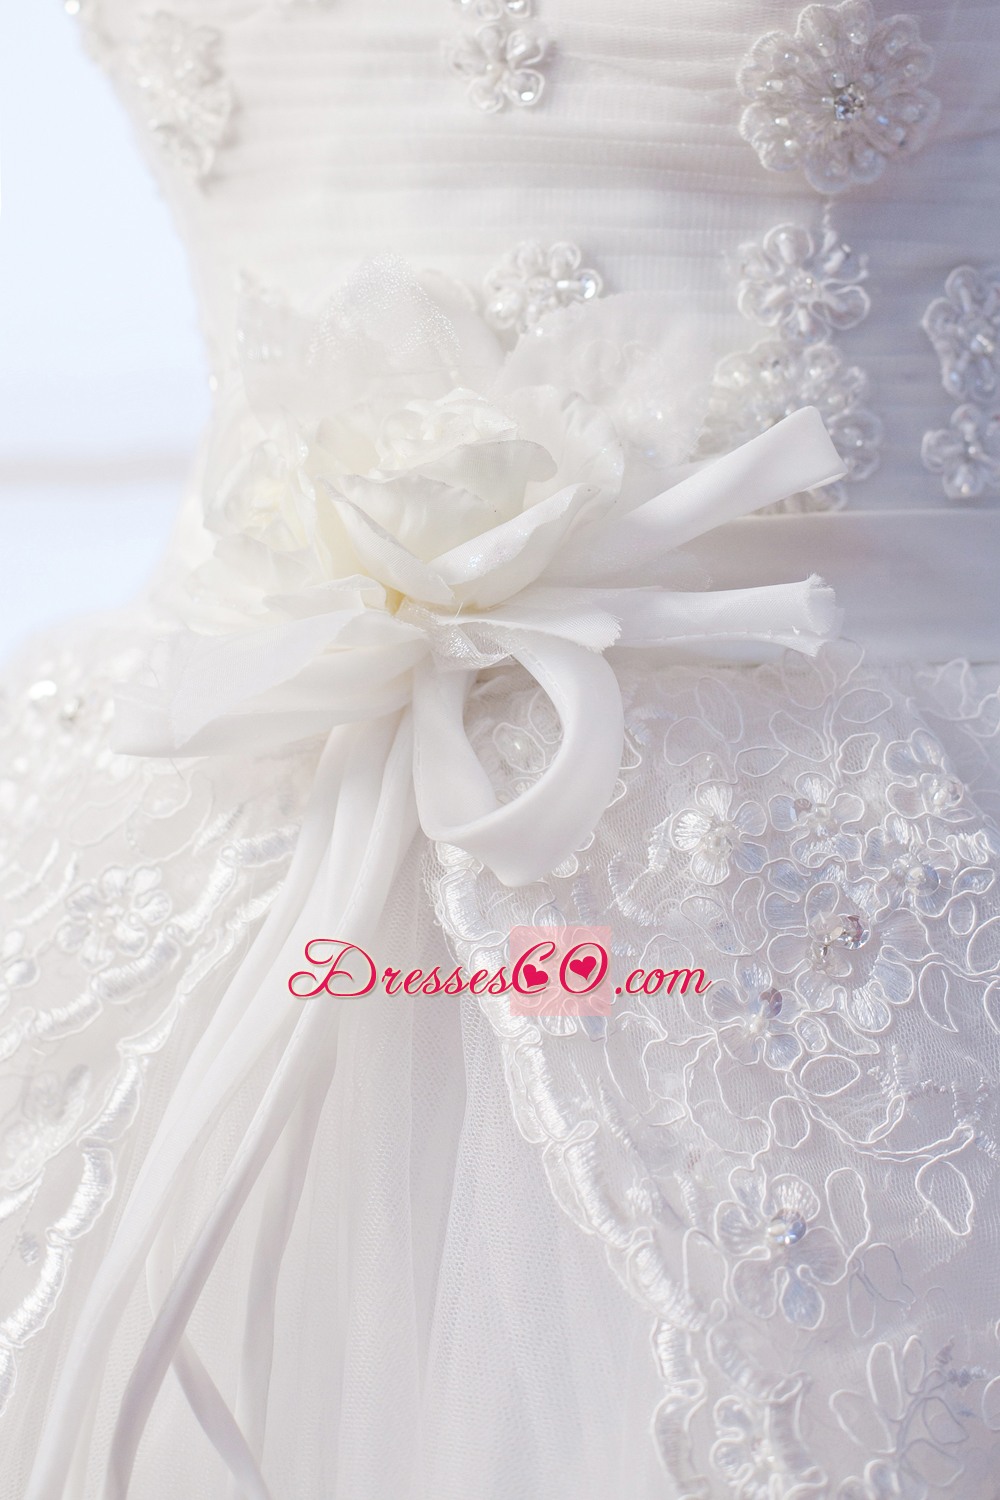 Beautiful A-line Longtulle Appliques And Hand Made Flowers Wedding Dress